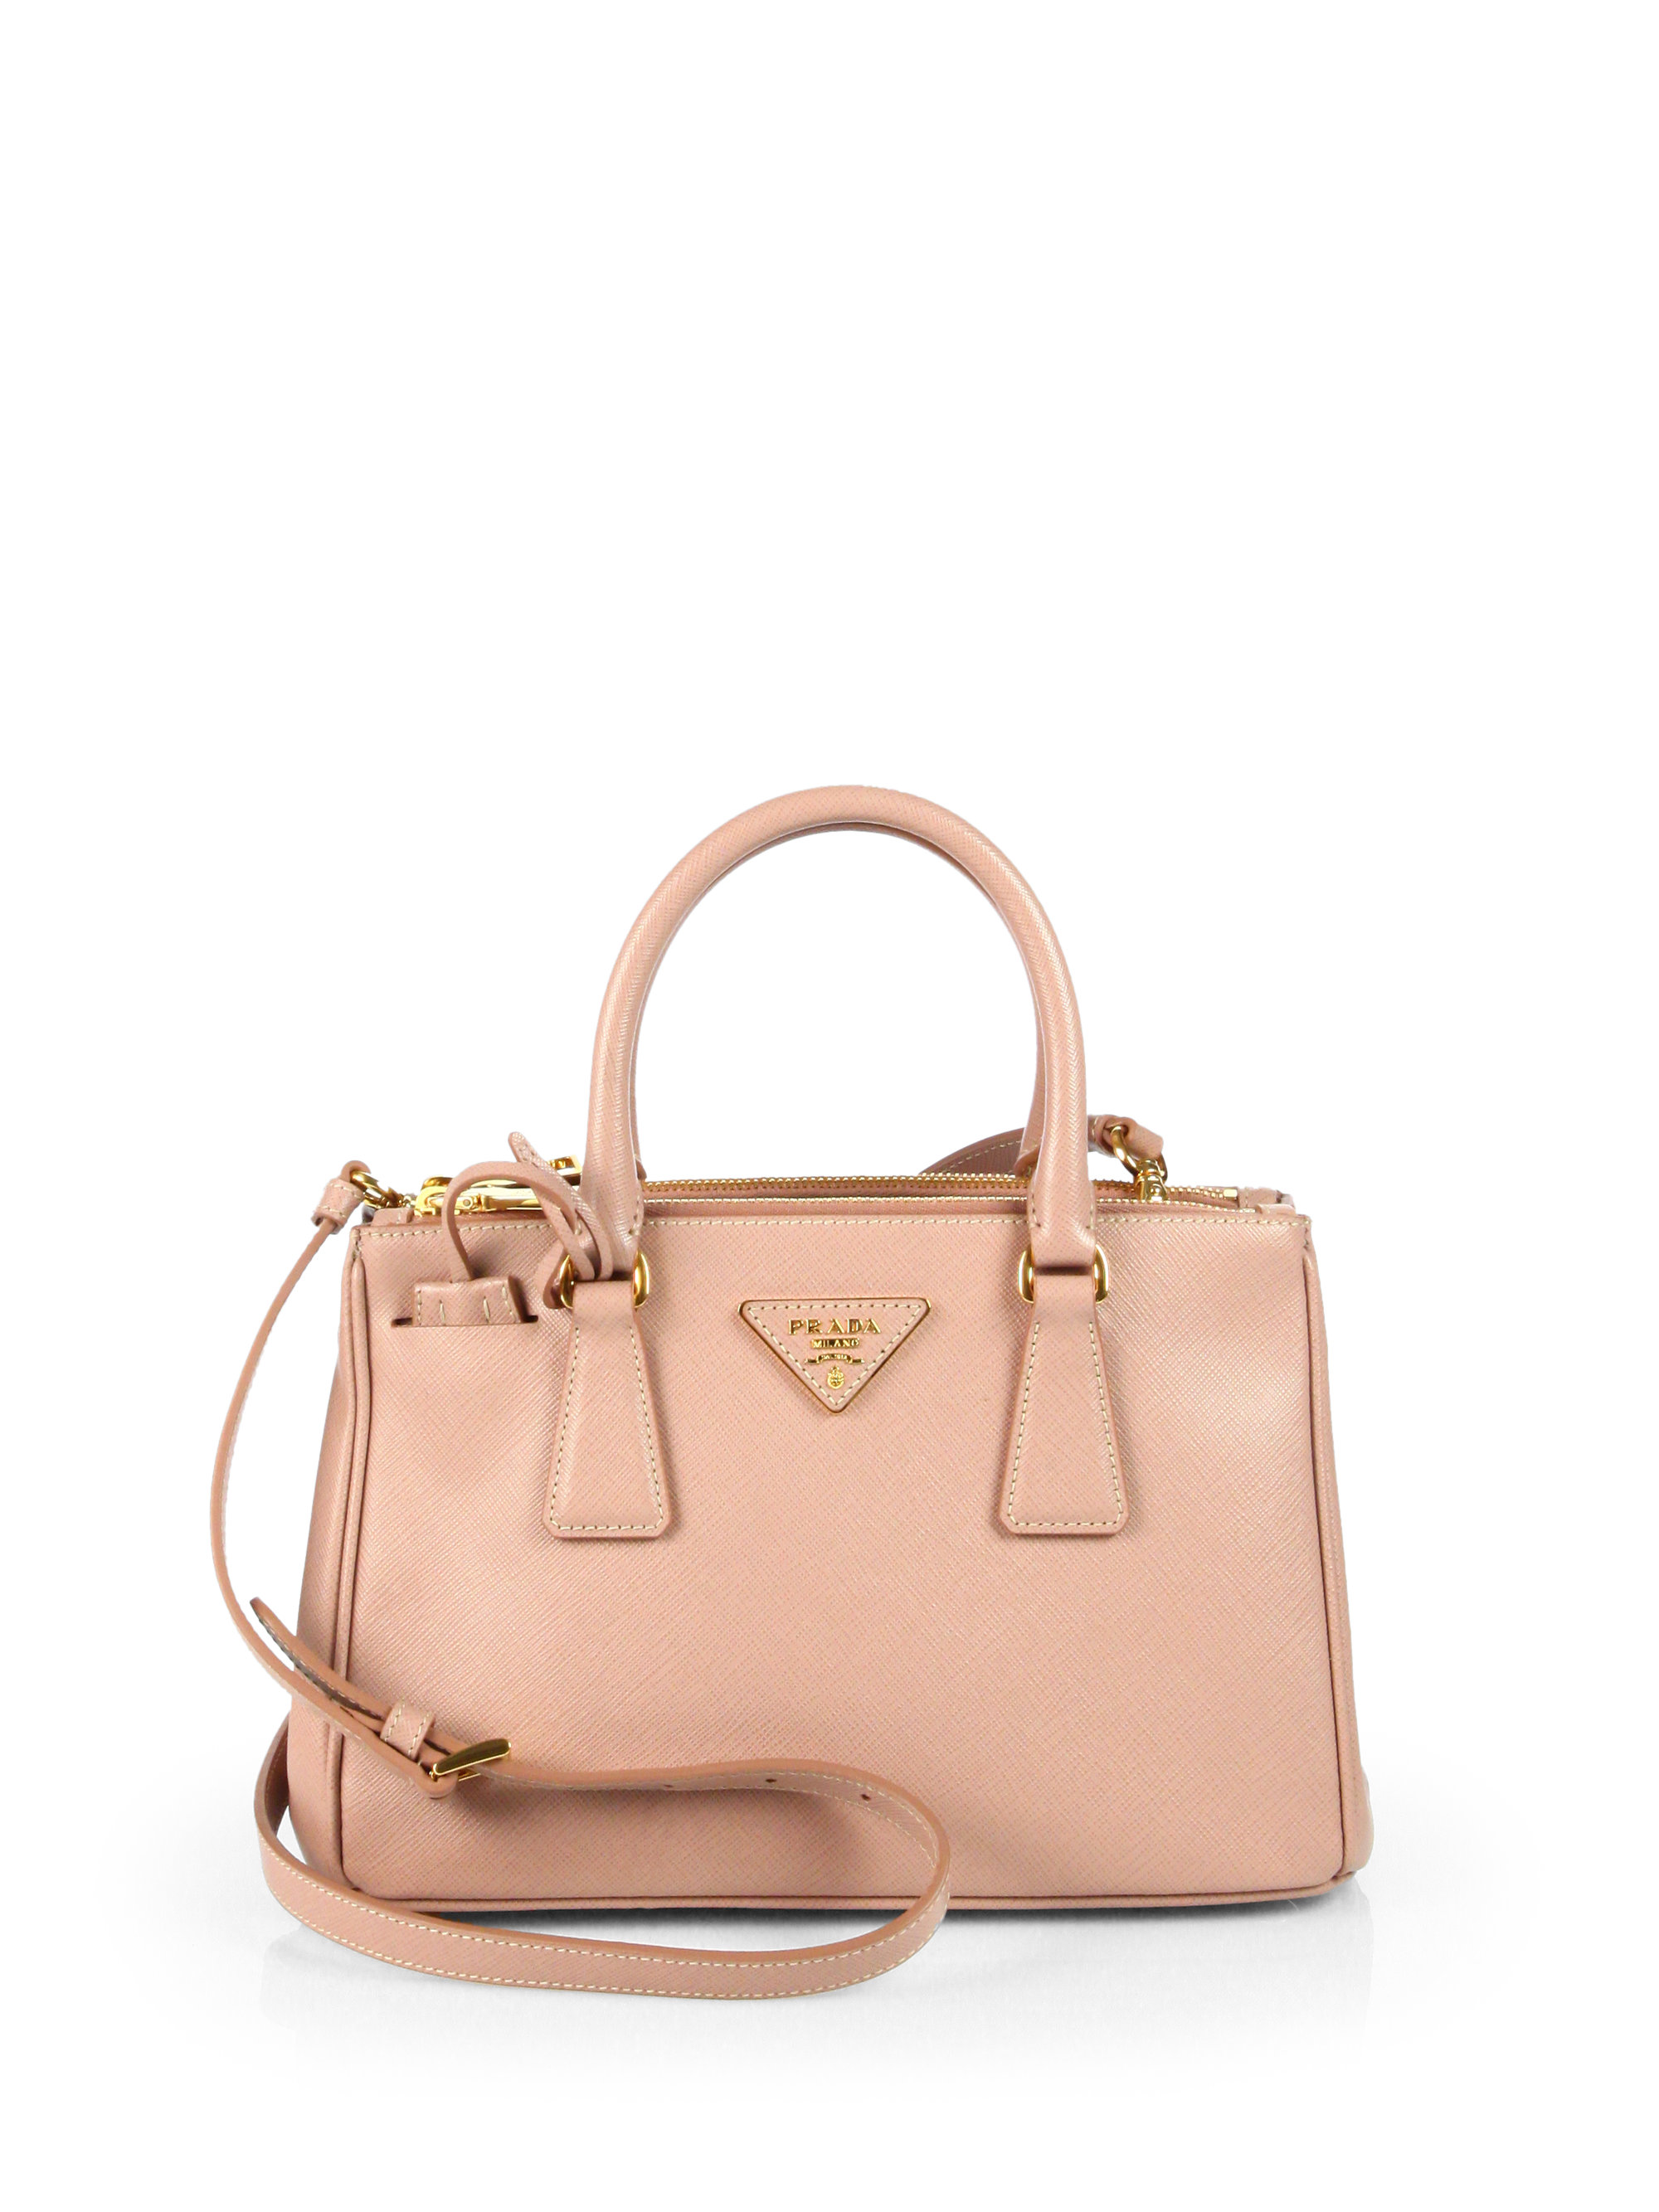 Prada Saffiano Lux Small Double-Zip Tote Bag in Beige (PINK) | Lyst